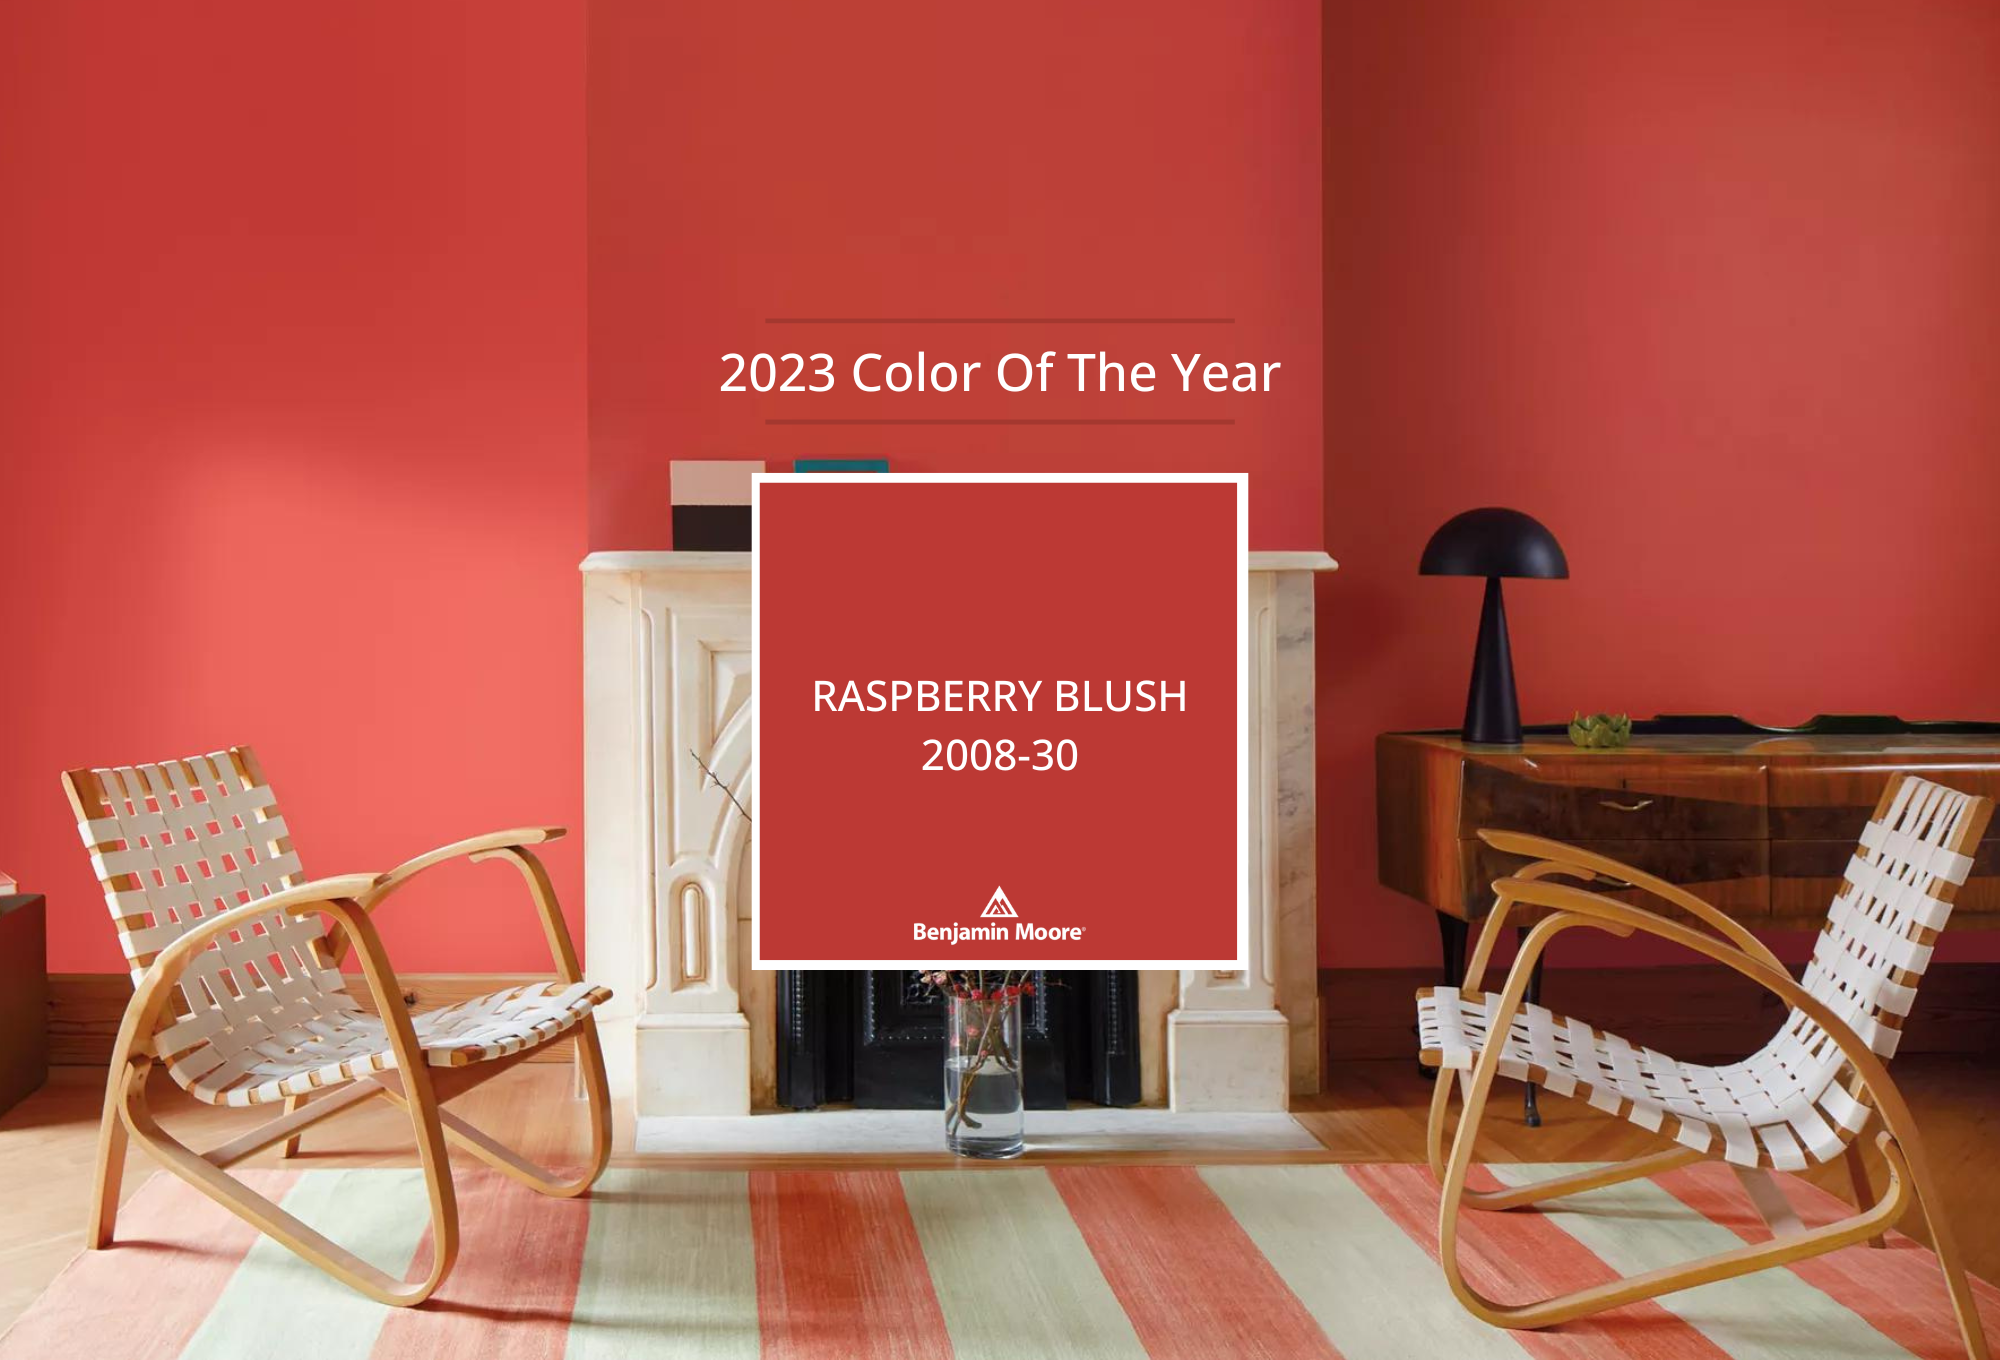 Benjamin Moore Color of the Year 2023: Raspberry Blush 2008-30